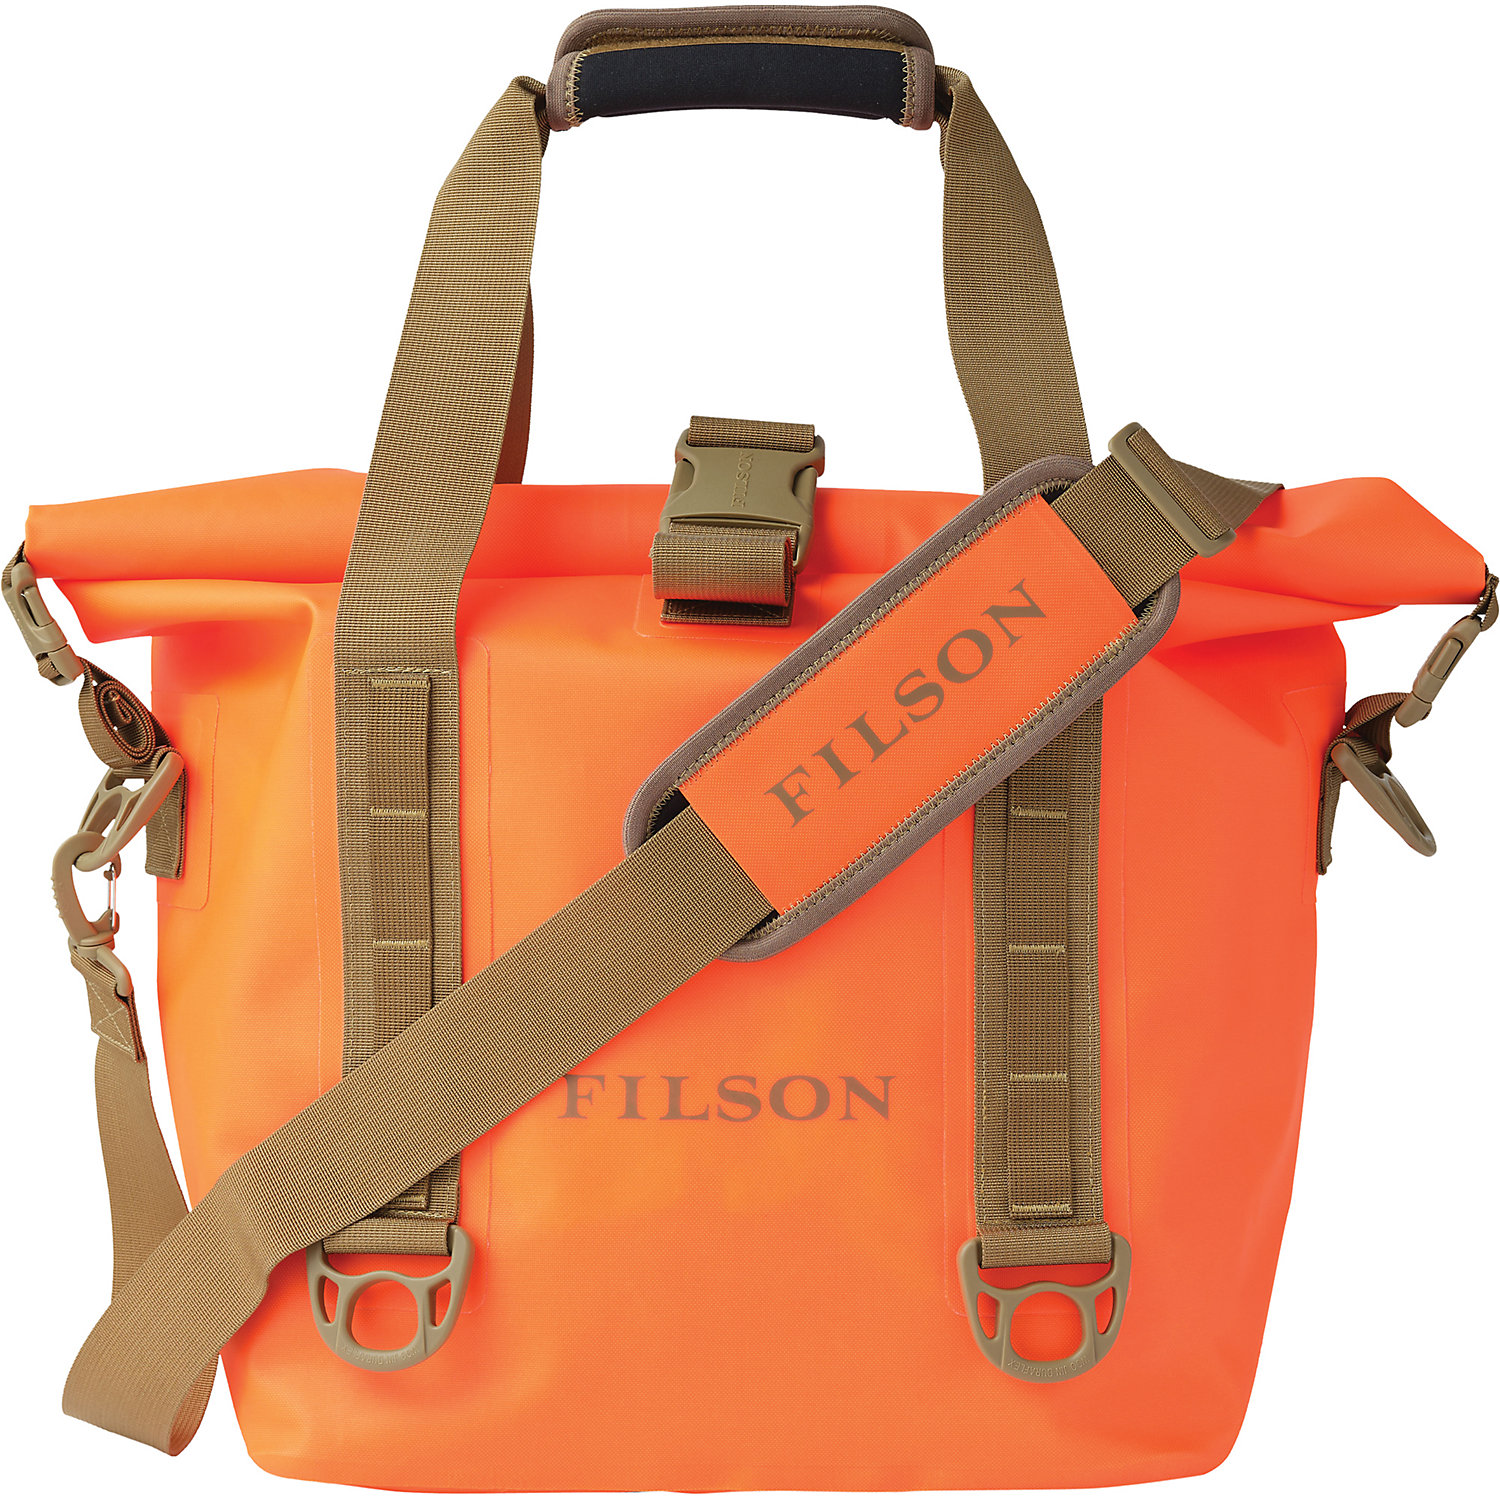 Filson Dry Roll-Top Tote Bag